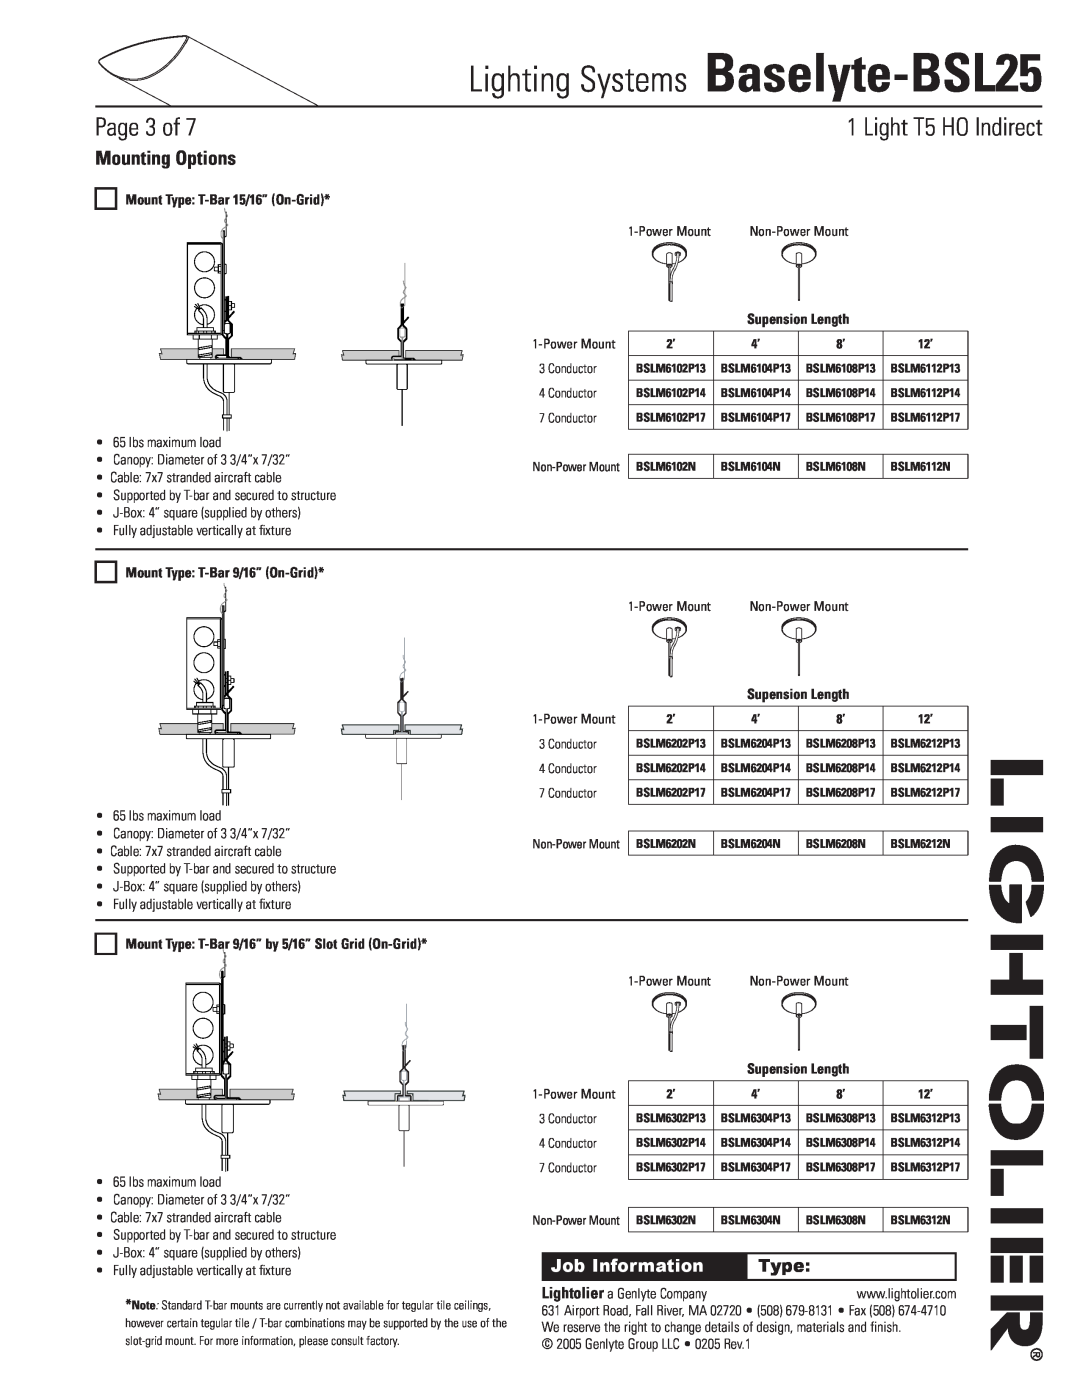 Lightolier Baselyte-BSL25 Mounting Options, Mount Type T-Bar15/16” On-Grid, Supension Length, Page of, Job Information 